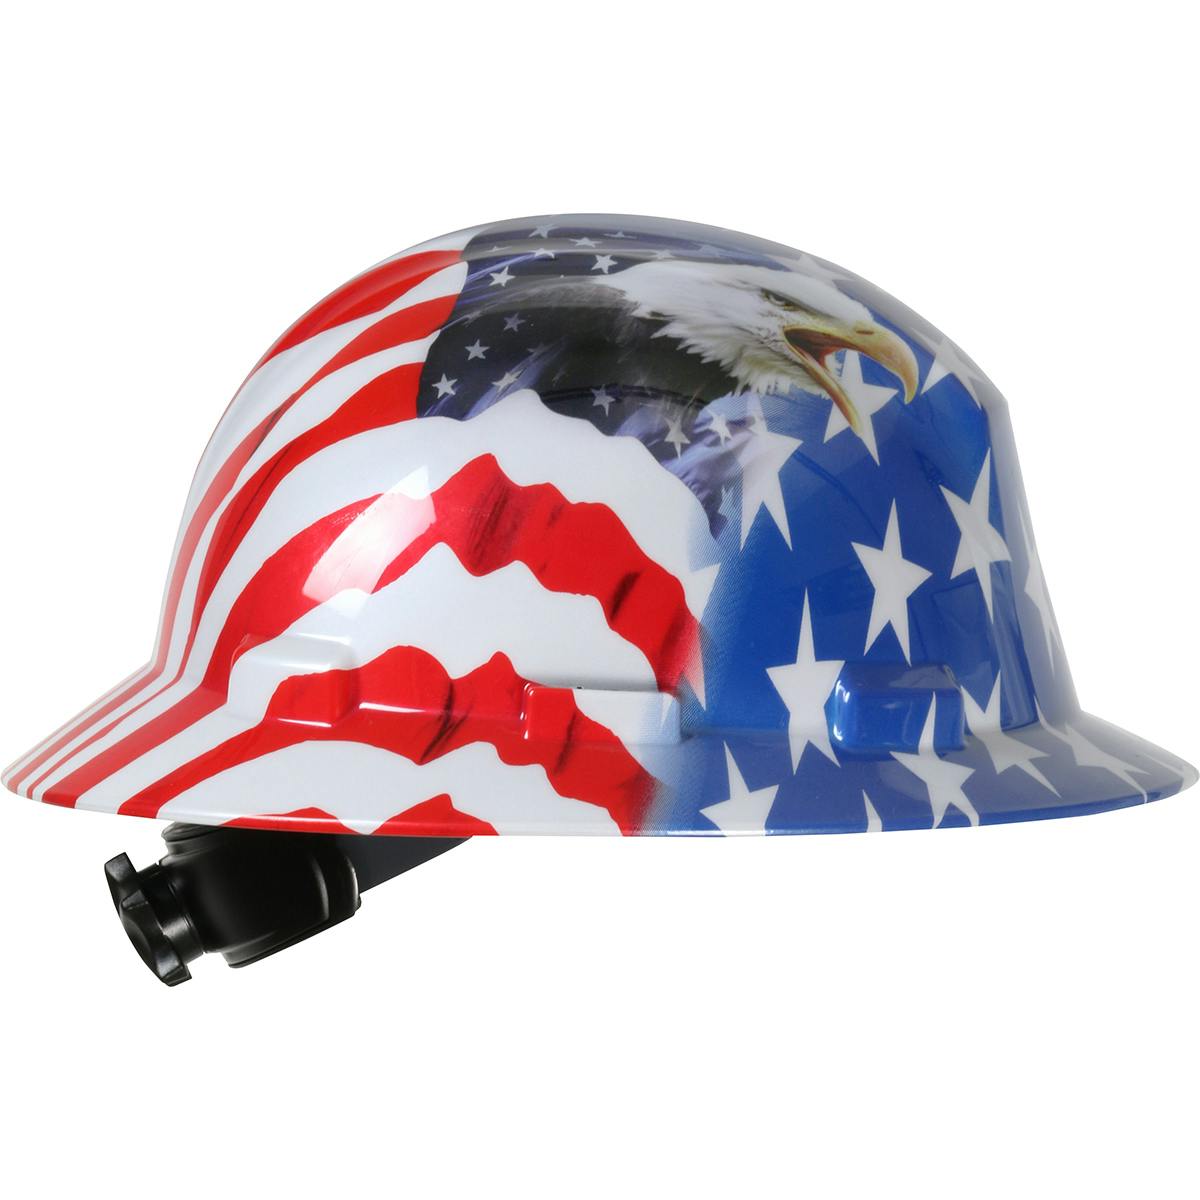 Full Brim Hard Hat with HDPE Shell, 4-Point Textile Suspension Graphic Wrap and Wheel Ratchet Adjustment, Navy (280-HP641R-USA) - OS_0